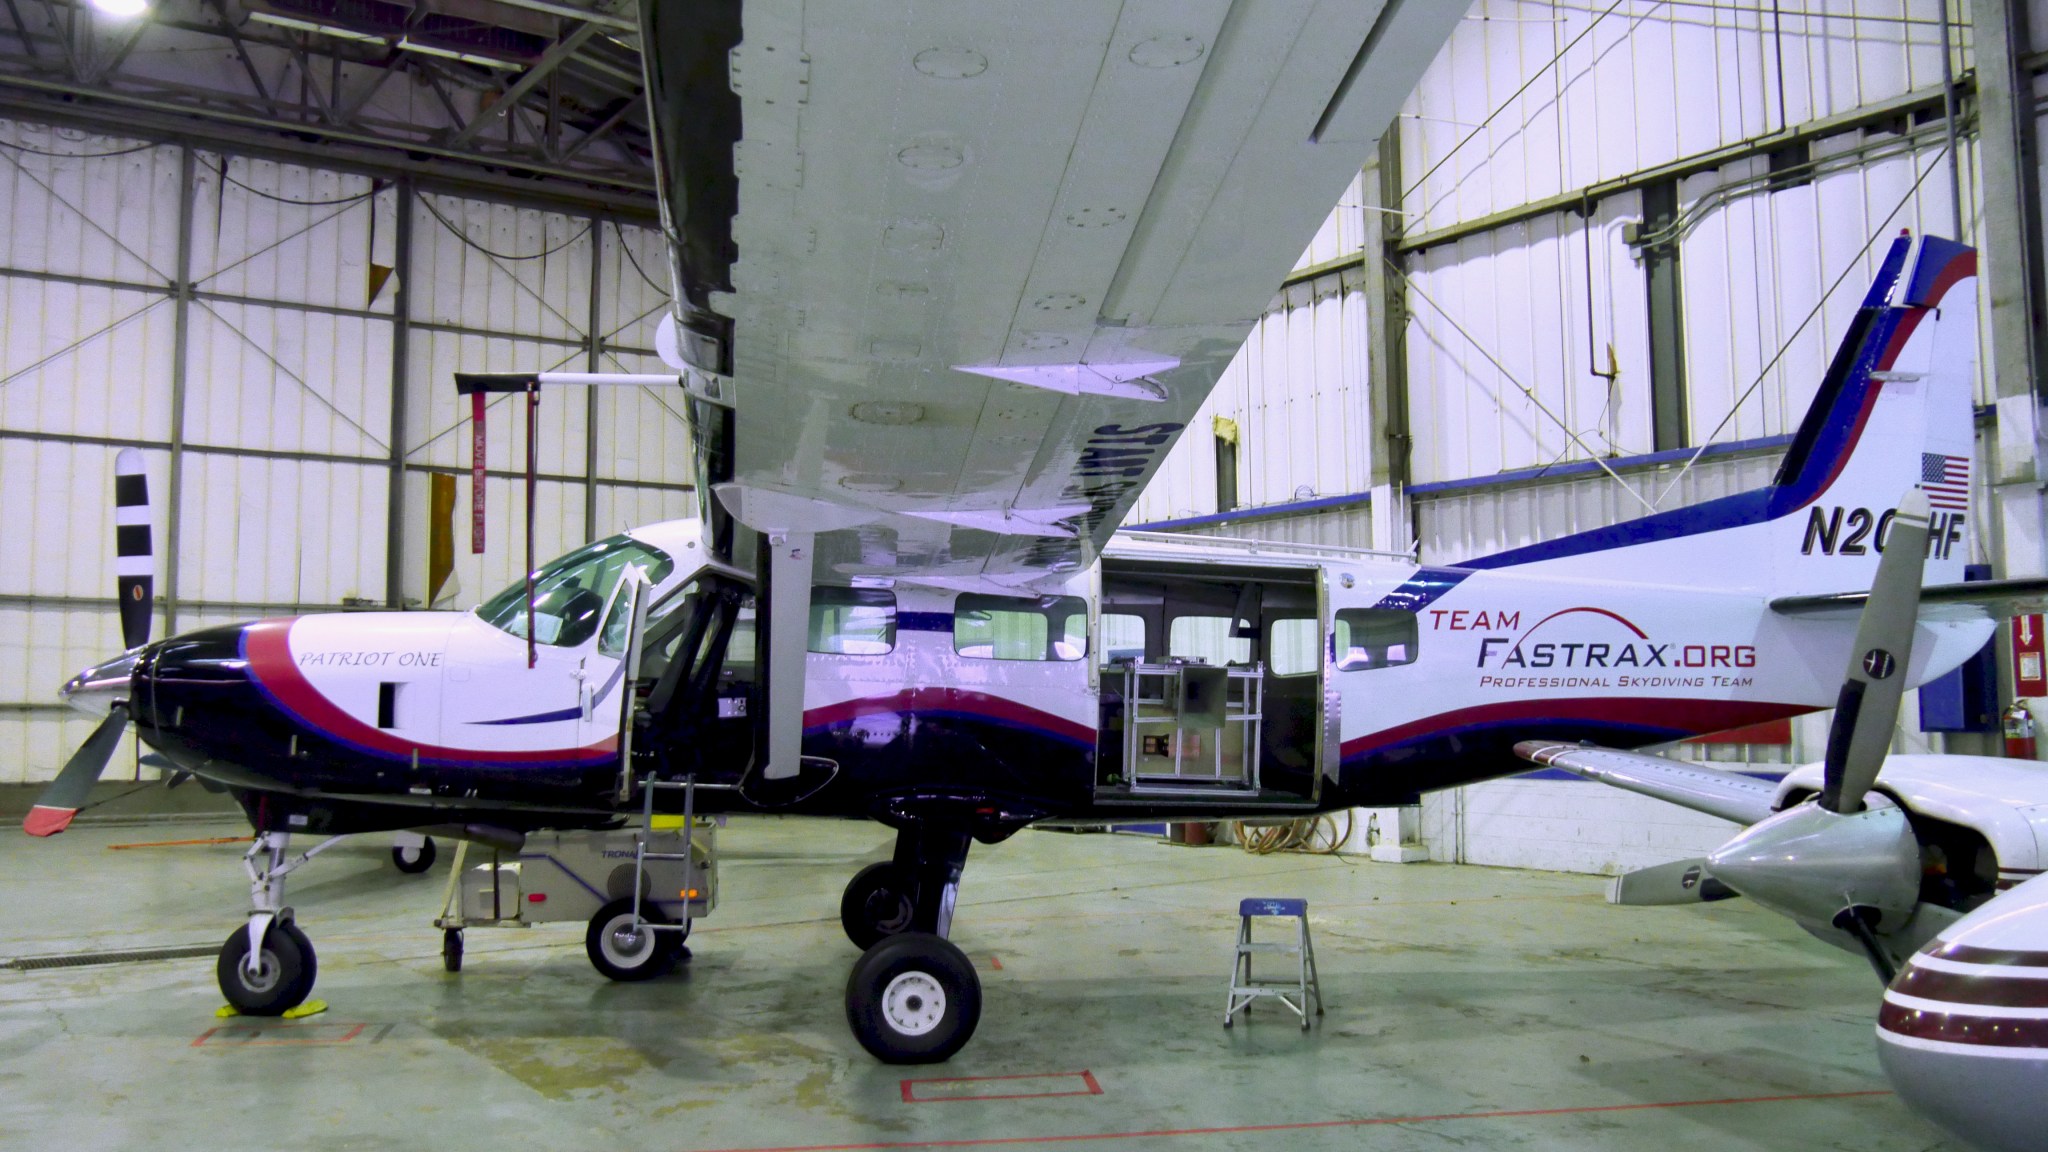  A small plane sits in a hangar with its doors open. In the back side, door, a squat, cube instrument is visible. 